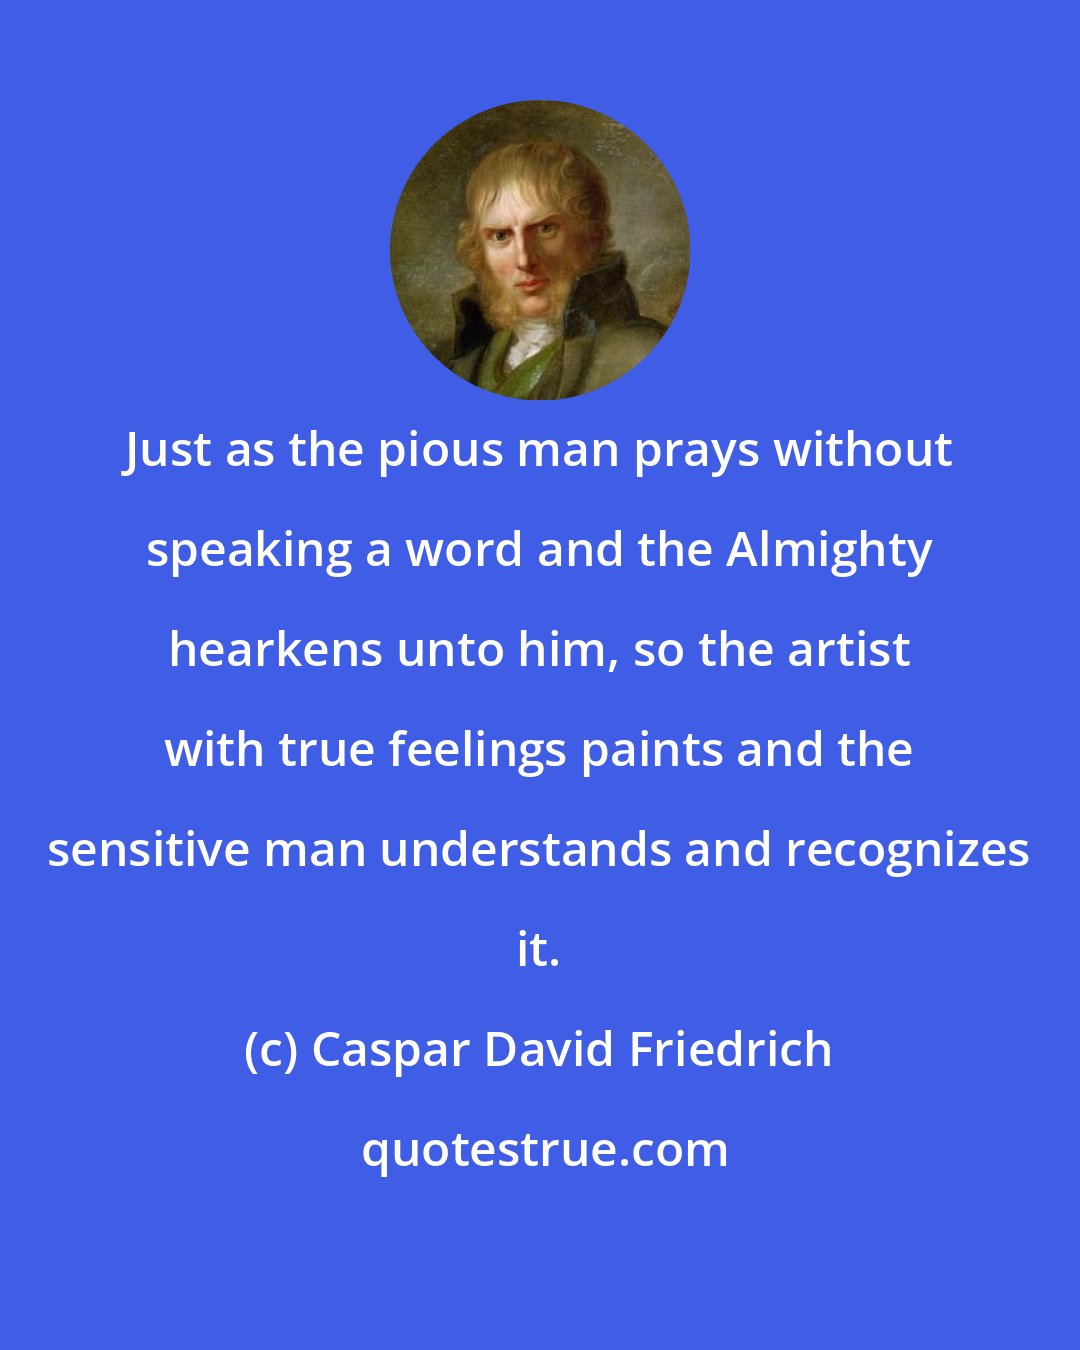 Caspar David Friedrich: Just as the pious man prays without speaking a word and the Almighty hearkens unto him, so the artist with true feelings paints and the sensitive man understands and recognizes it.